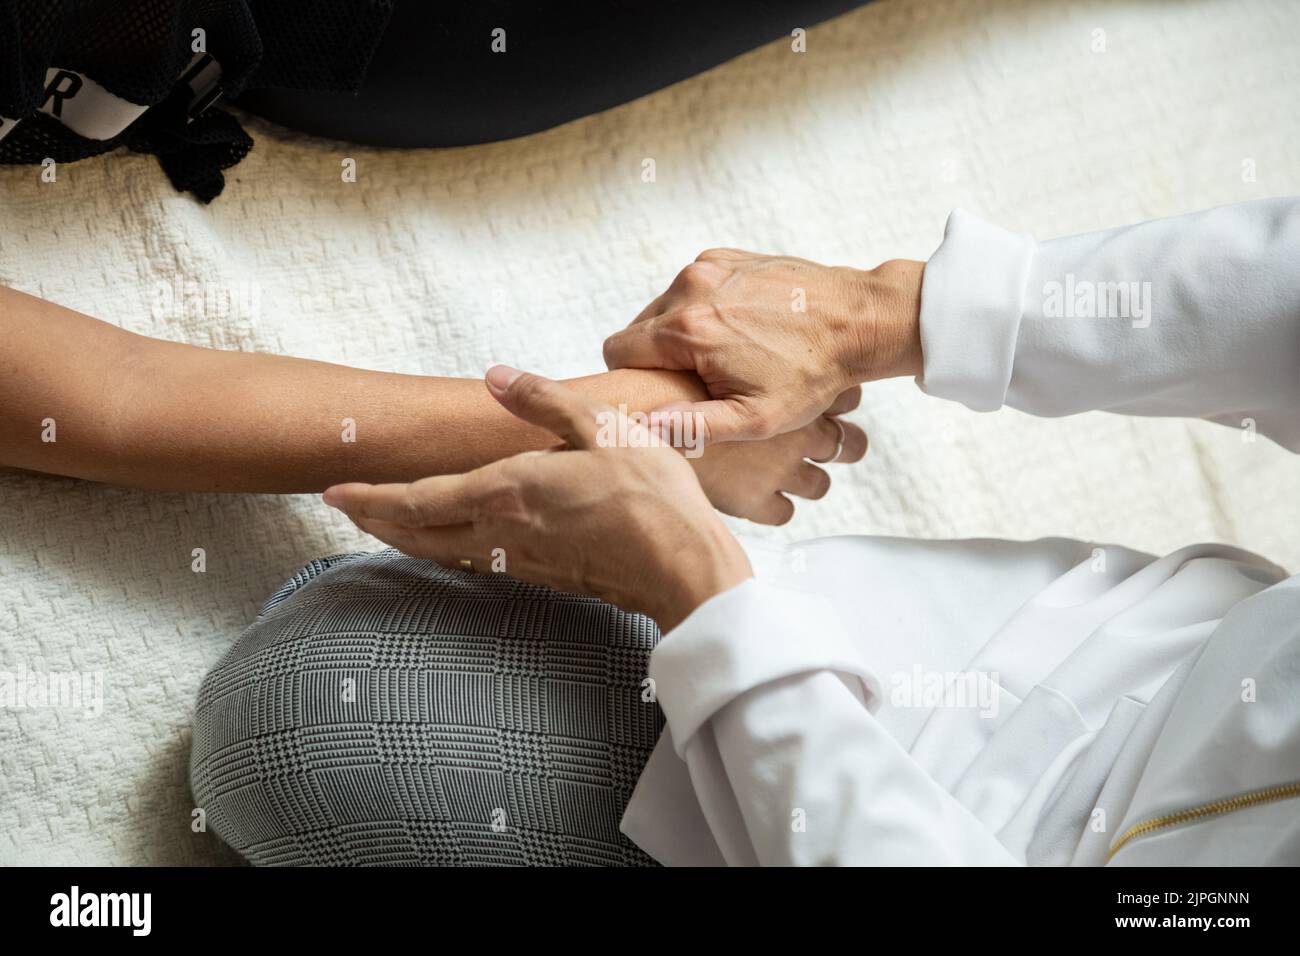 Goiânia, Goias, Brazil – July 18, 2022: Closeup of hands of masseuse, applying therapeutic massage on the hand of a patient who is lying down. Stock Photo